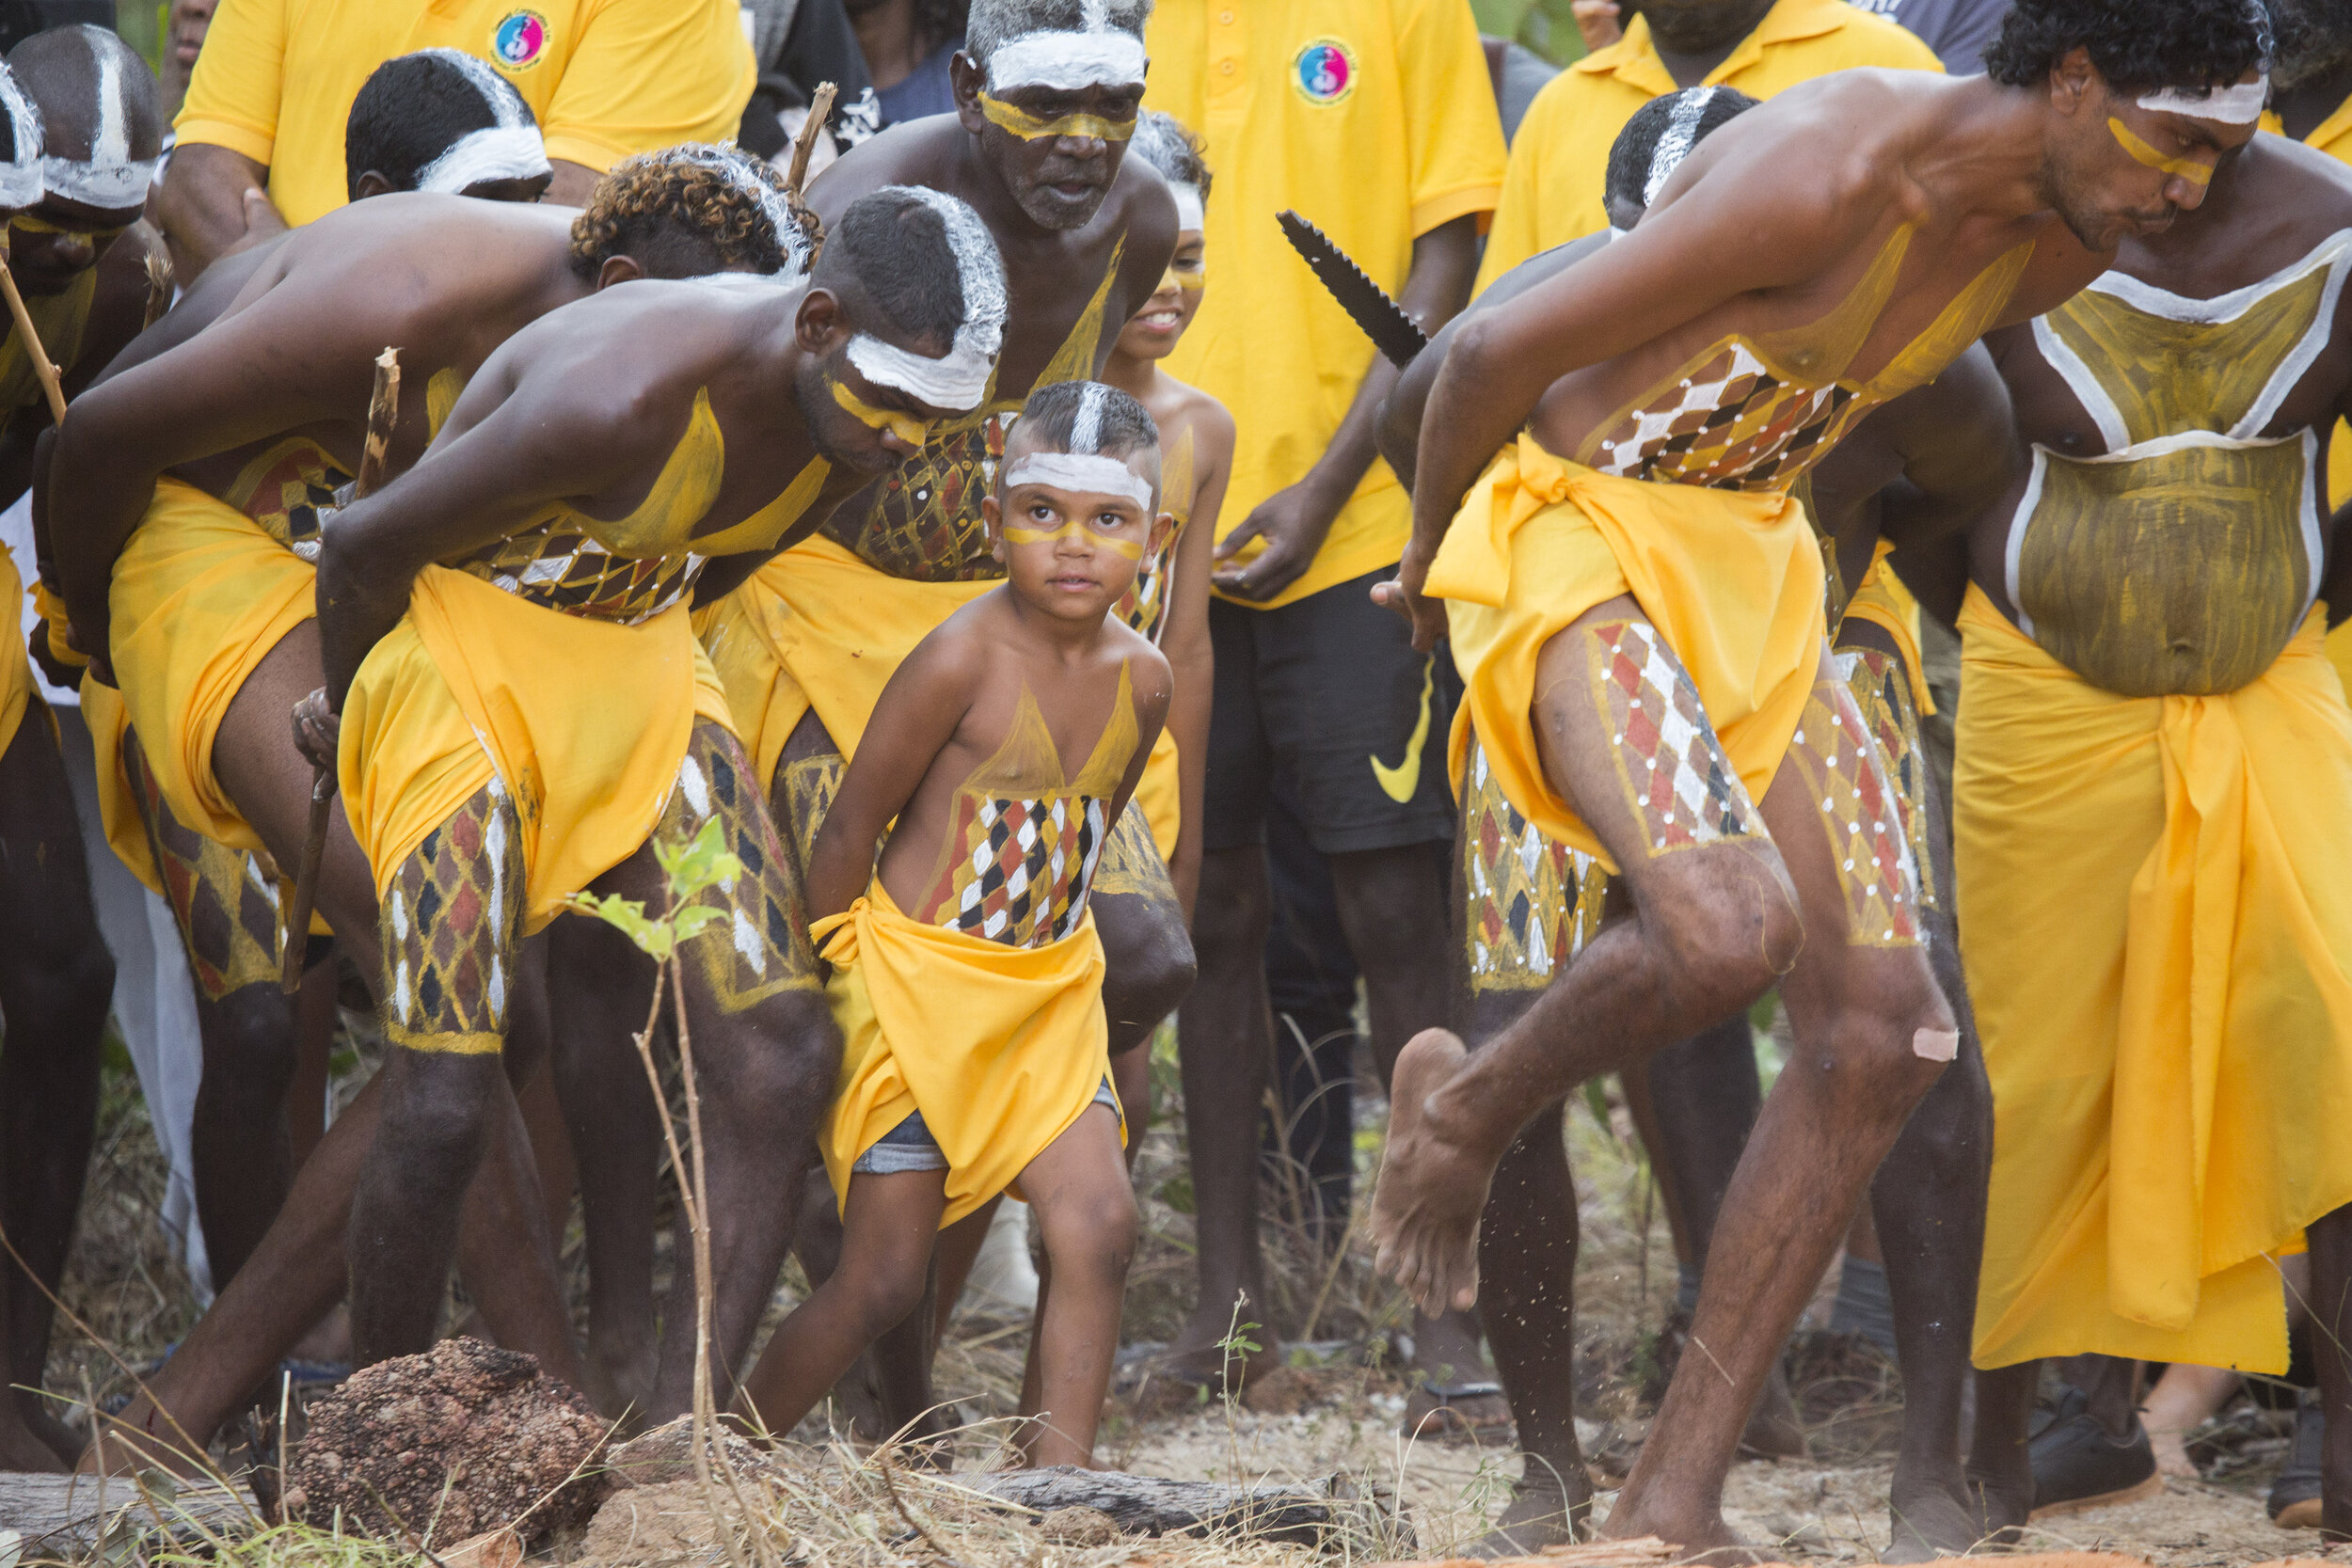  Garma is held on Gumatj land in Arnhem Land, Northern Territory and the Gumatj clan dancers perform the opening ceremony each year.&nbsp;Photo by Melanie Faith Dove. 